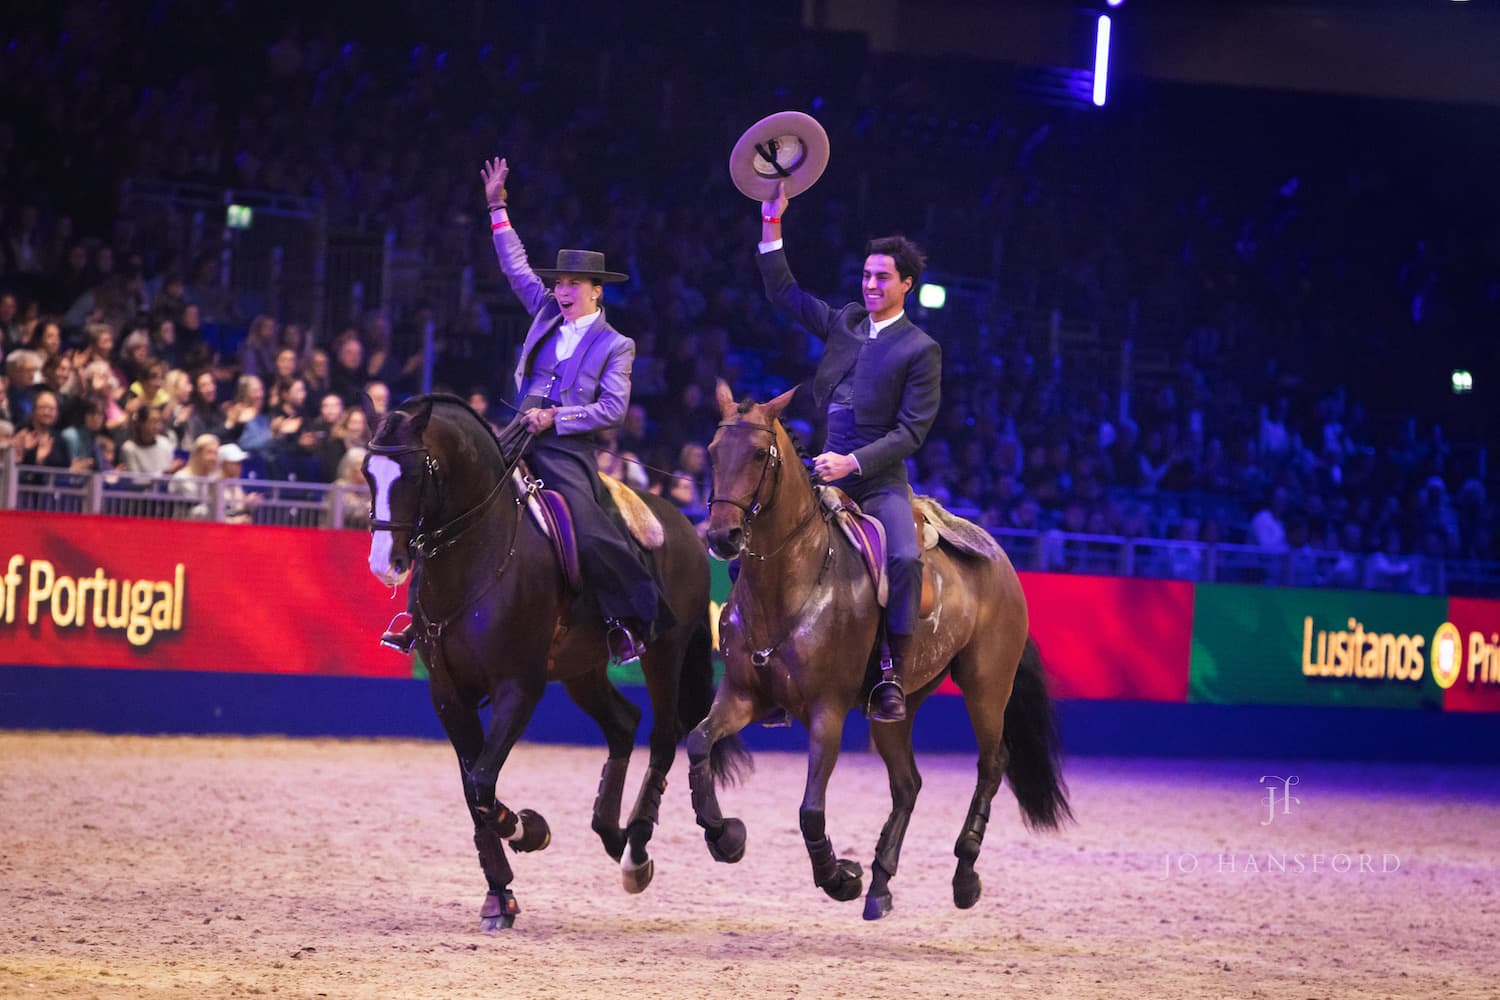 Pride of Portugal performance Lusitano horses at London International horse show